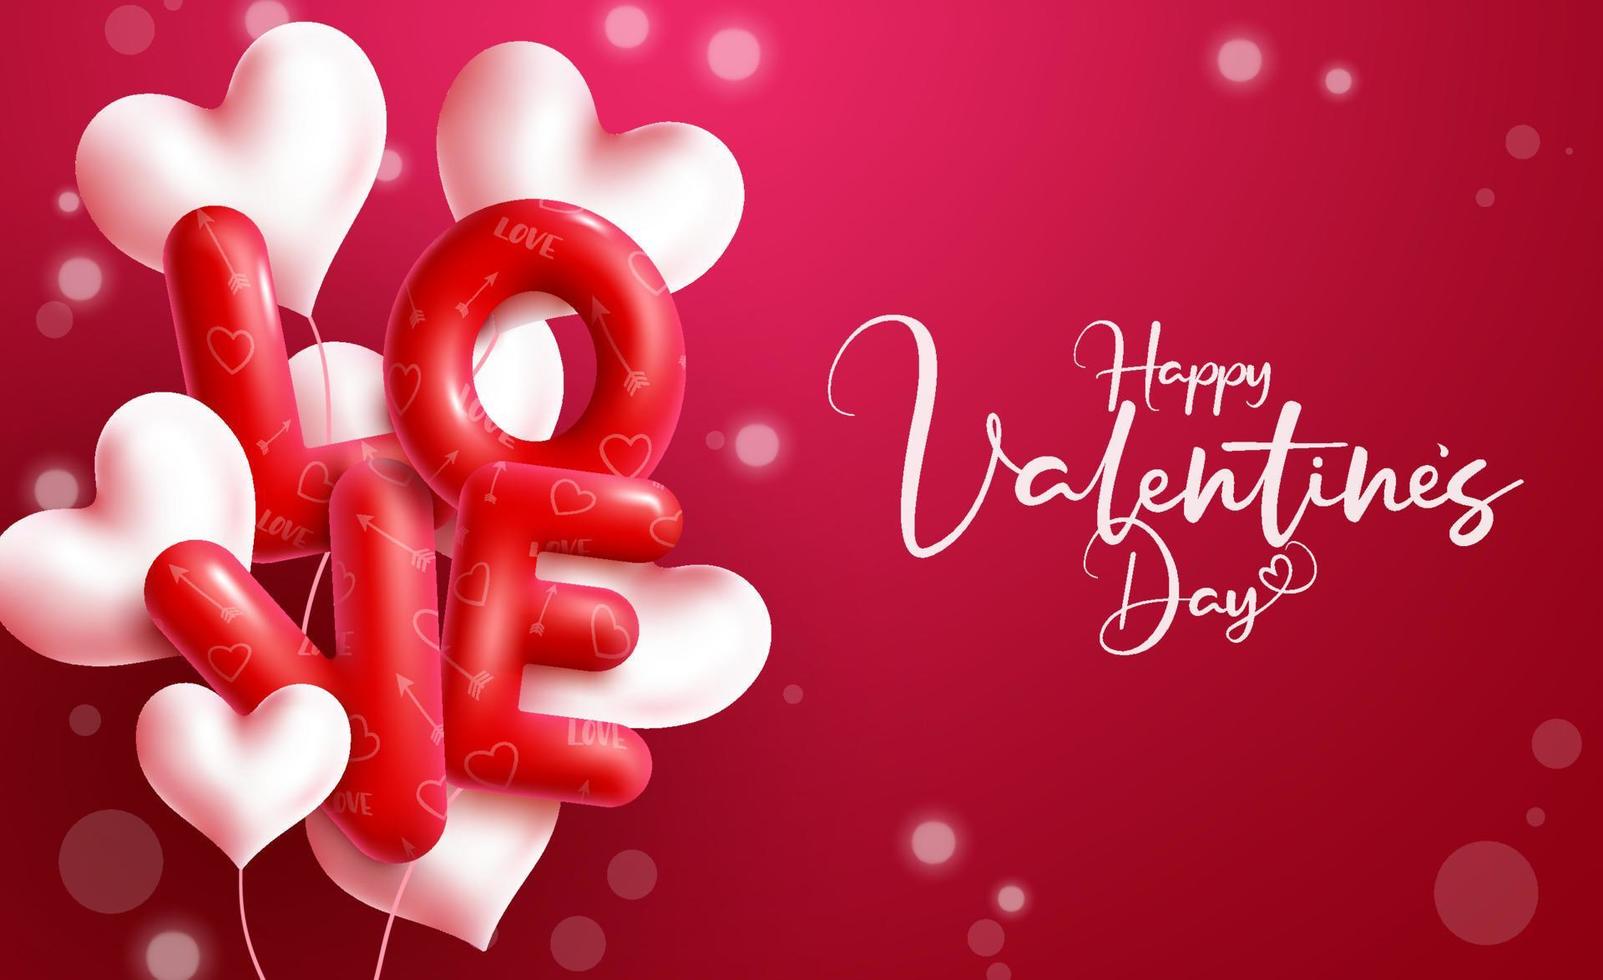 Valentines greeting vector background design. Happy valentine's day greeting text with hearts and bokeh decoration elements for valentine celebration messages card. Vector illustration.